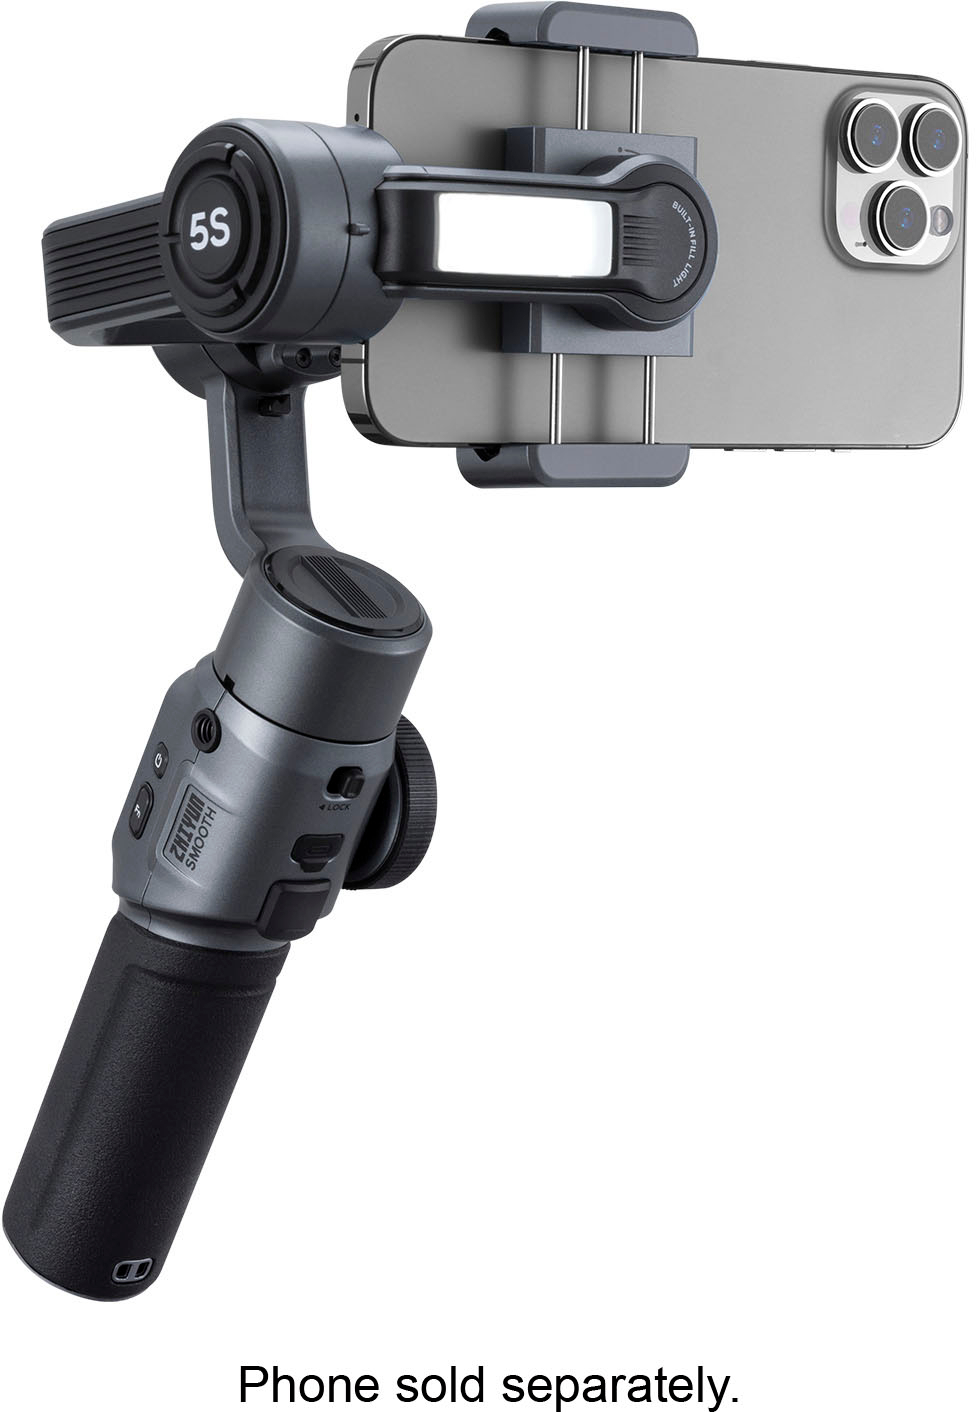 Zhiyun Smooth 5S 3-Axis Gimbal Stabilizer Standard Smartphones with detachable tri-pod stand Gray C030117G3 - Best Buy